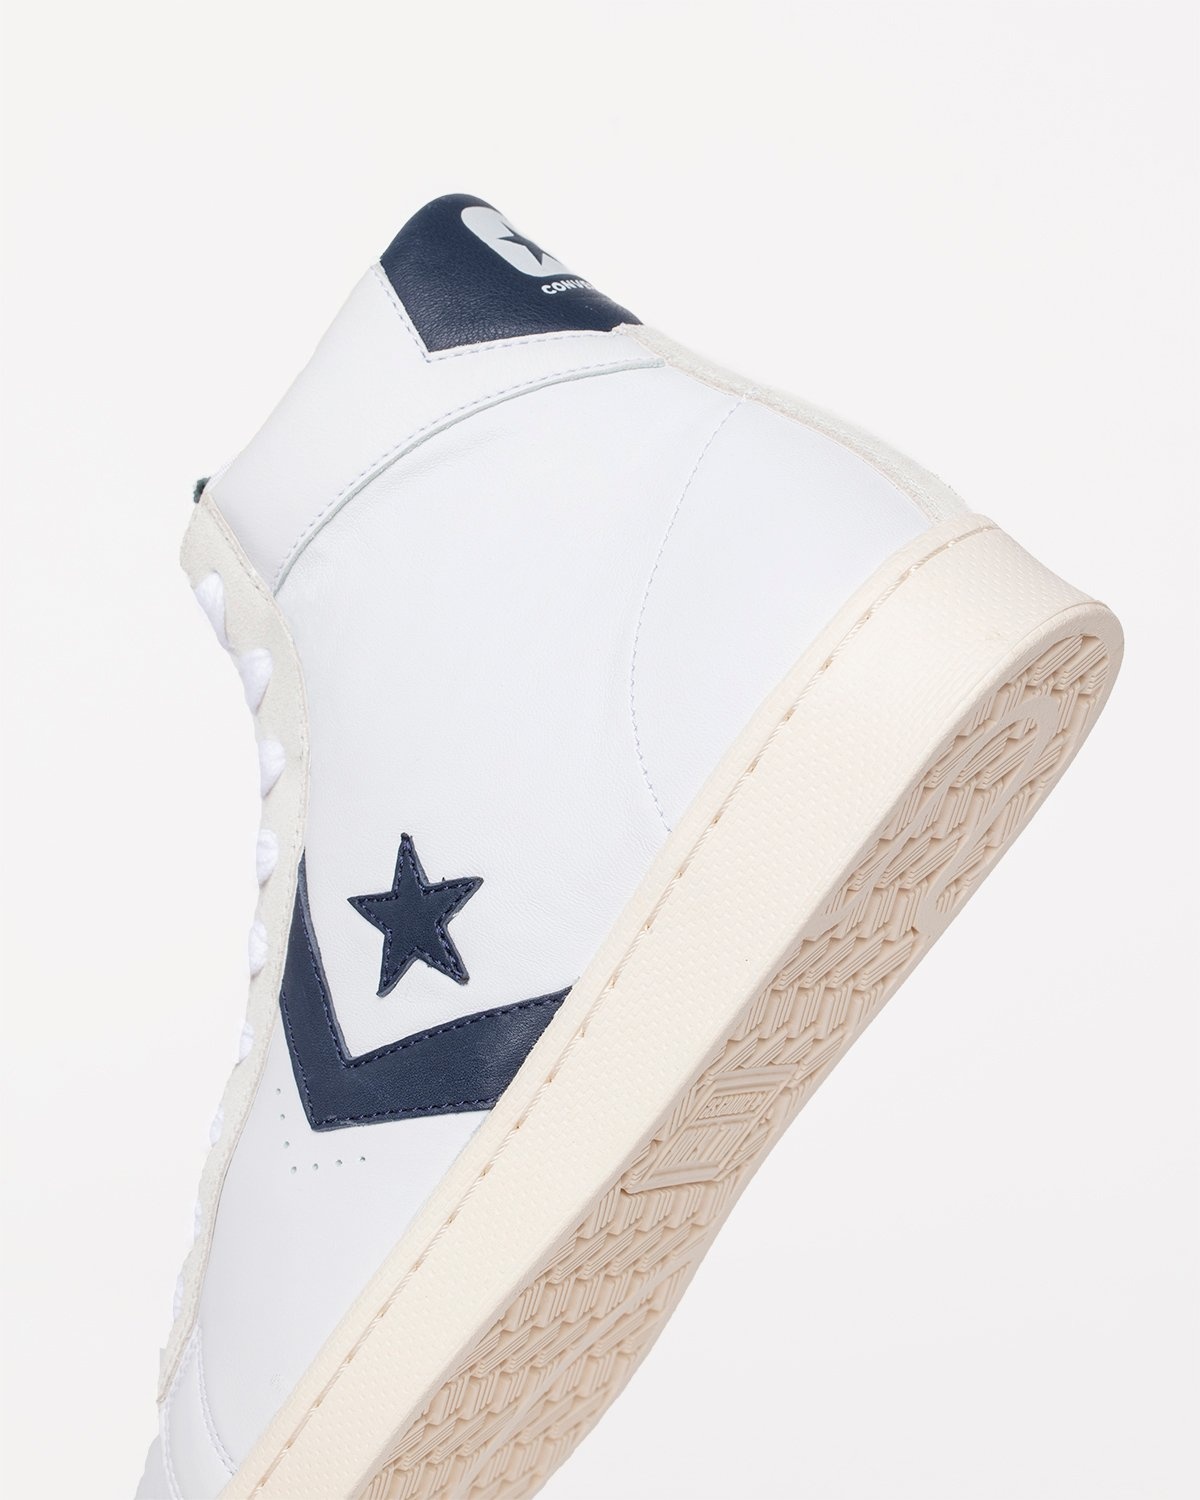 Converse – Pro Leather OG Mid White/Obsidian/Egret - High Top Sneakers - White - Image 2